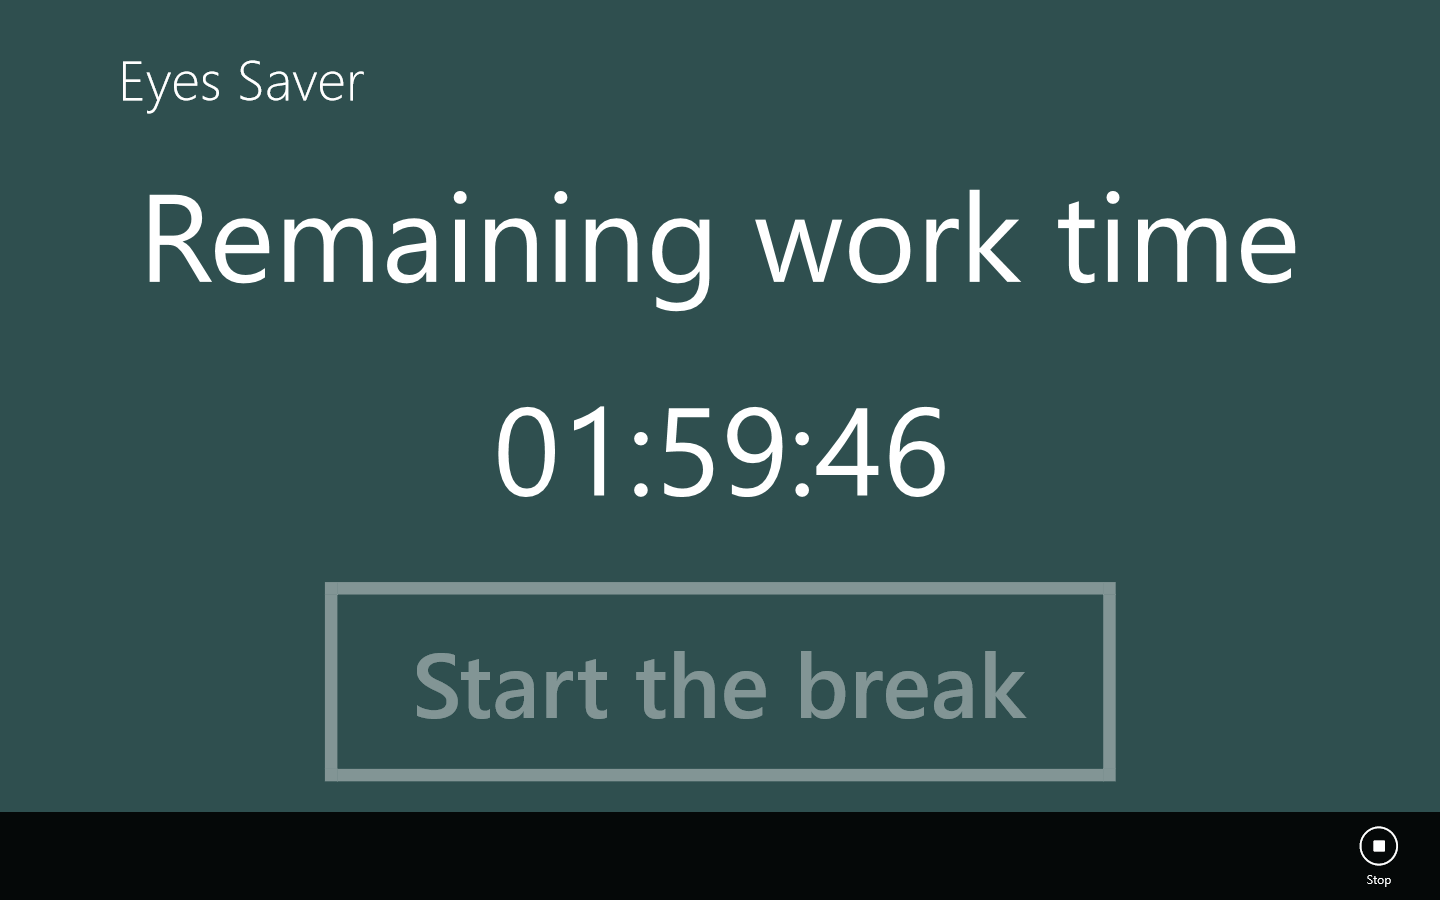 You always know remaining work time